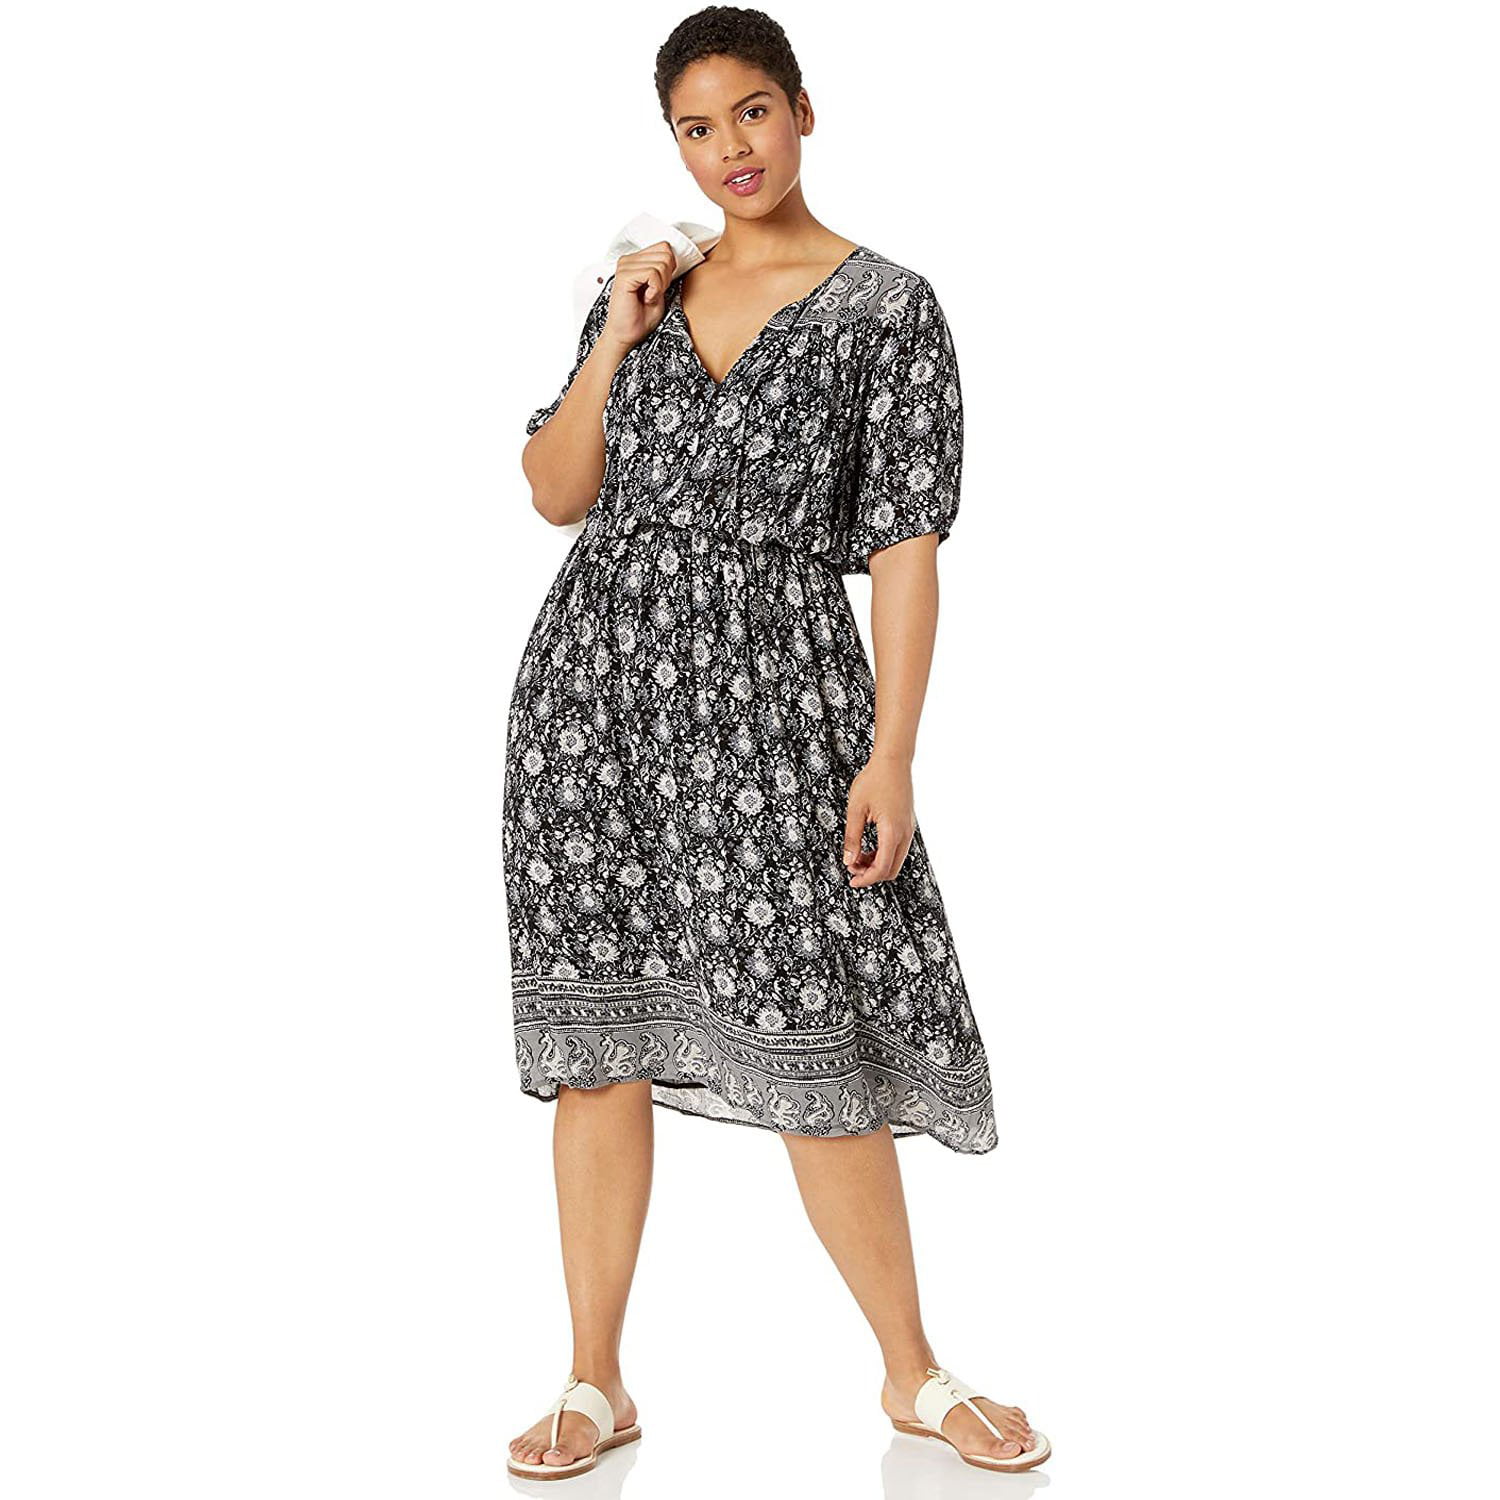 Fourever Funky - Lucky Brand Women Plus Size Printed Peasant Dress 3X ...